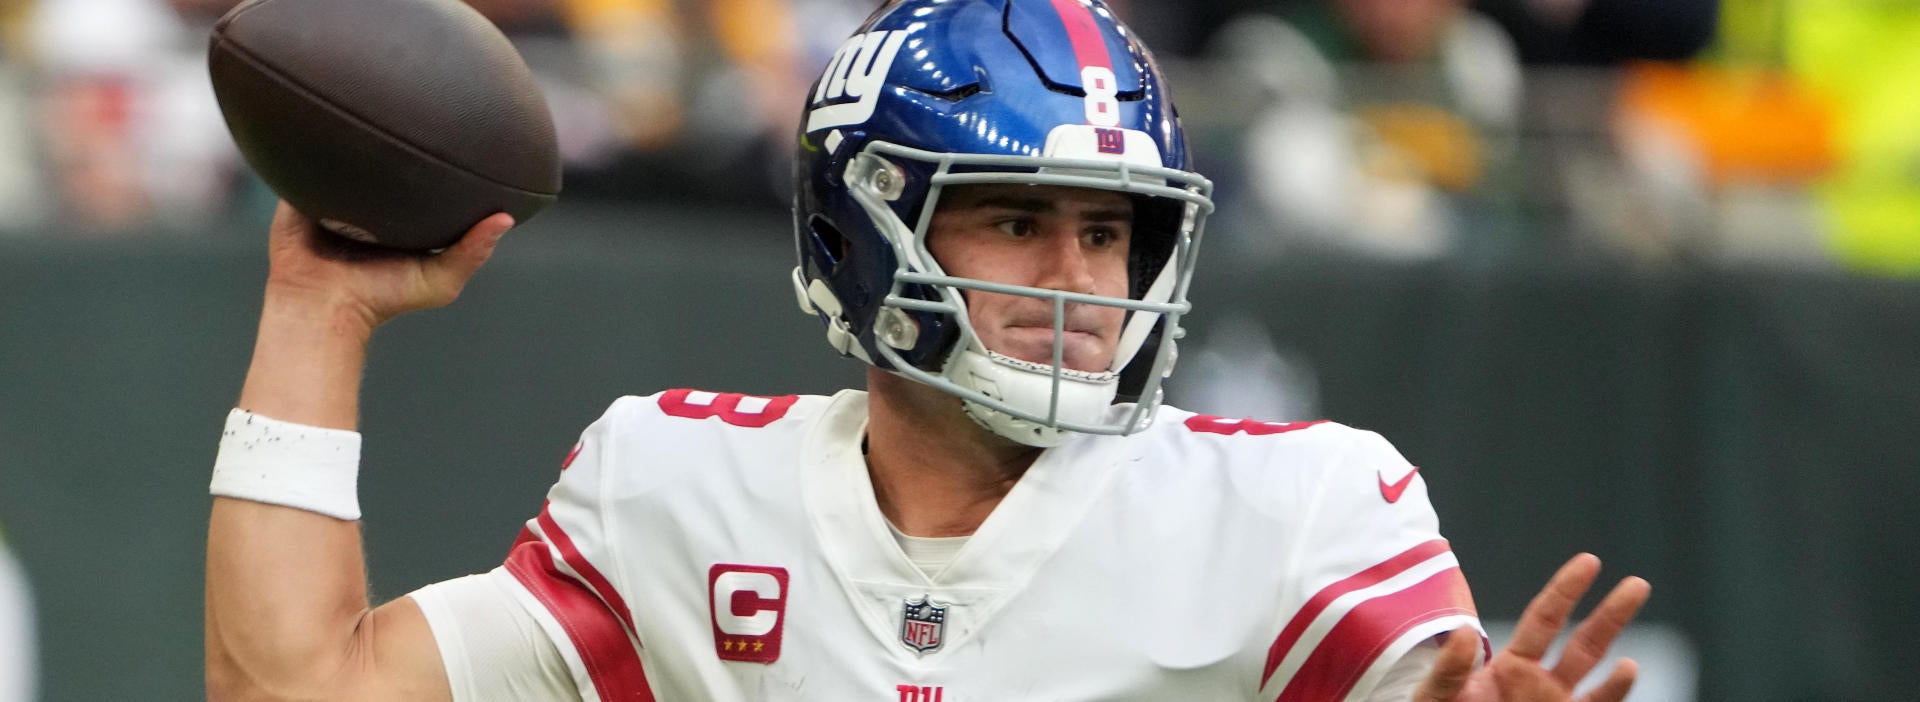 49ers vs. Giants NFL Week 3 lines, odds, picks: Thursday Night Football predictions and best bets from proven model